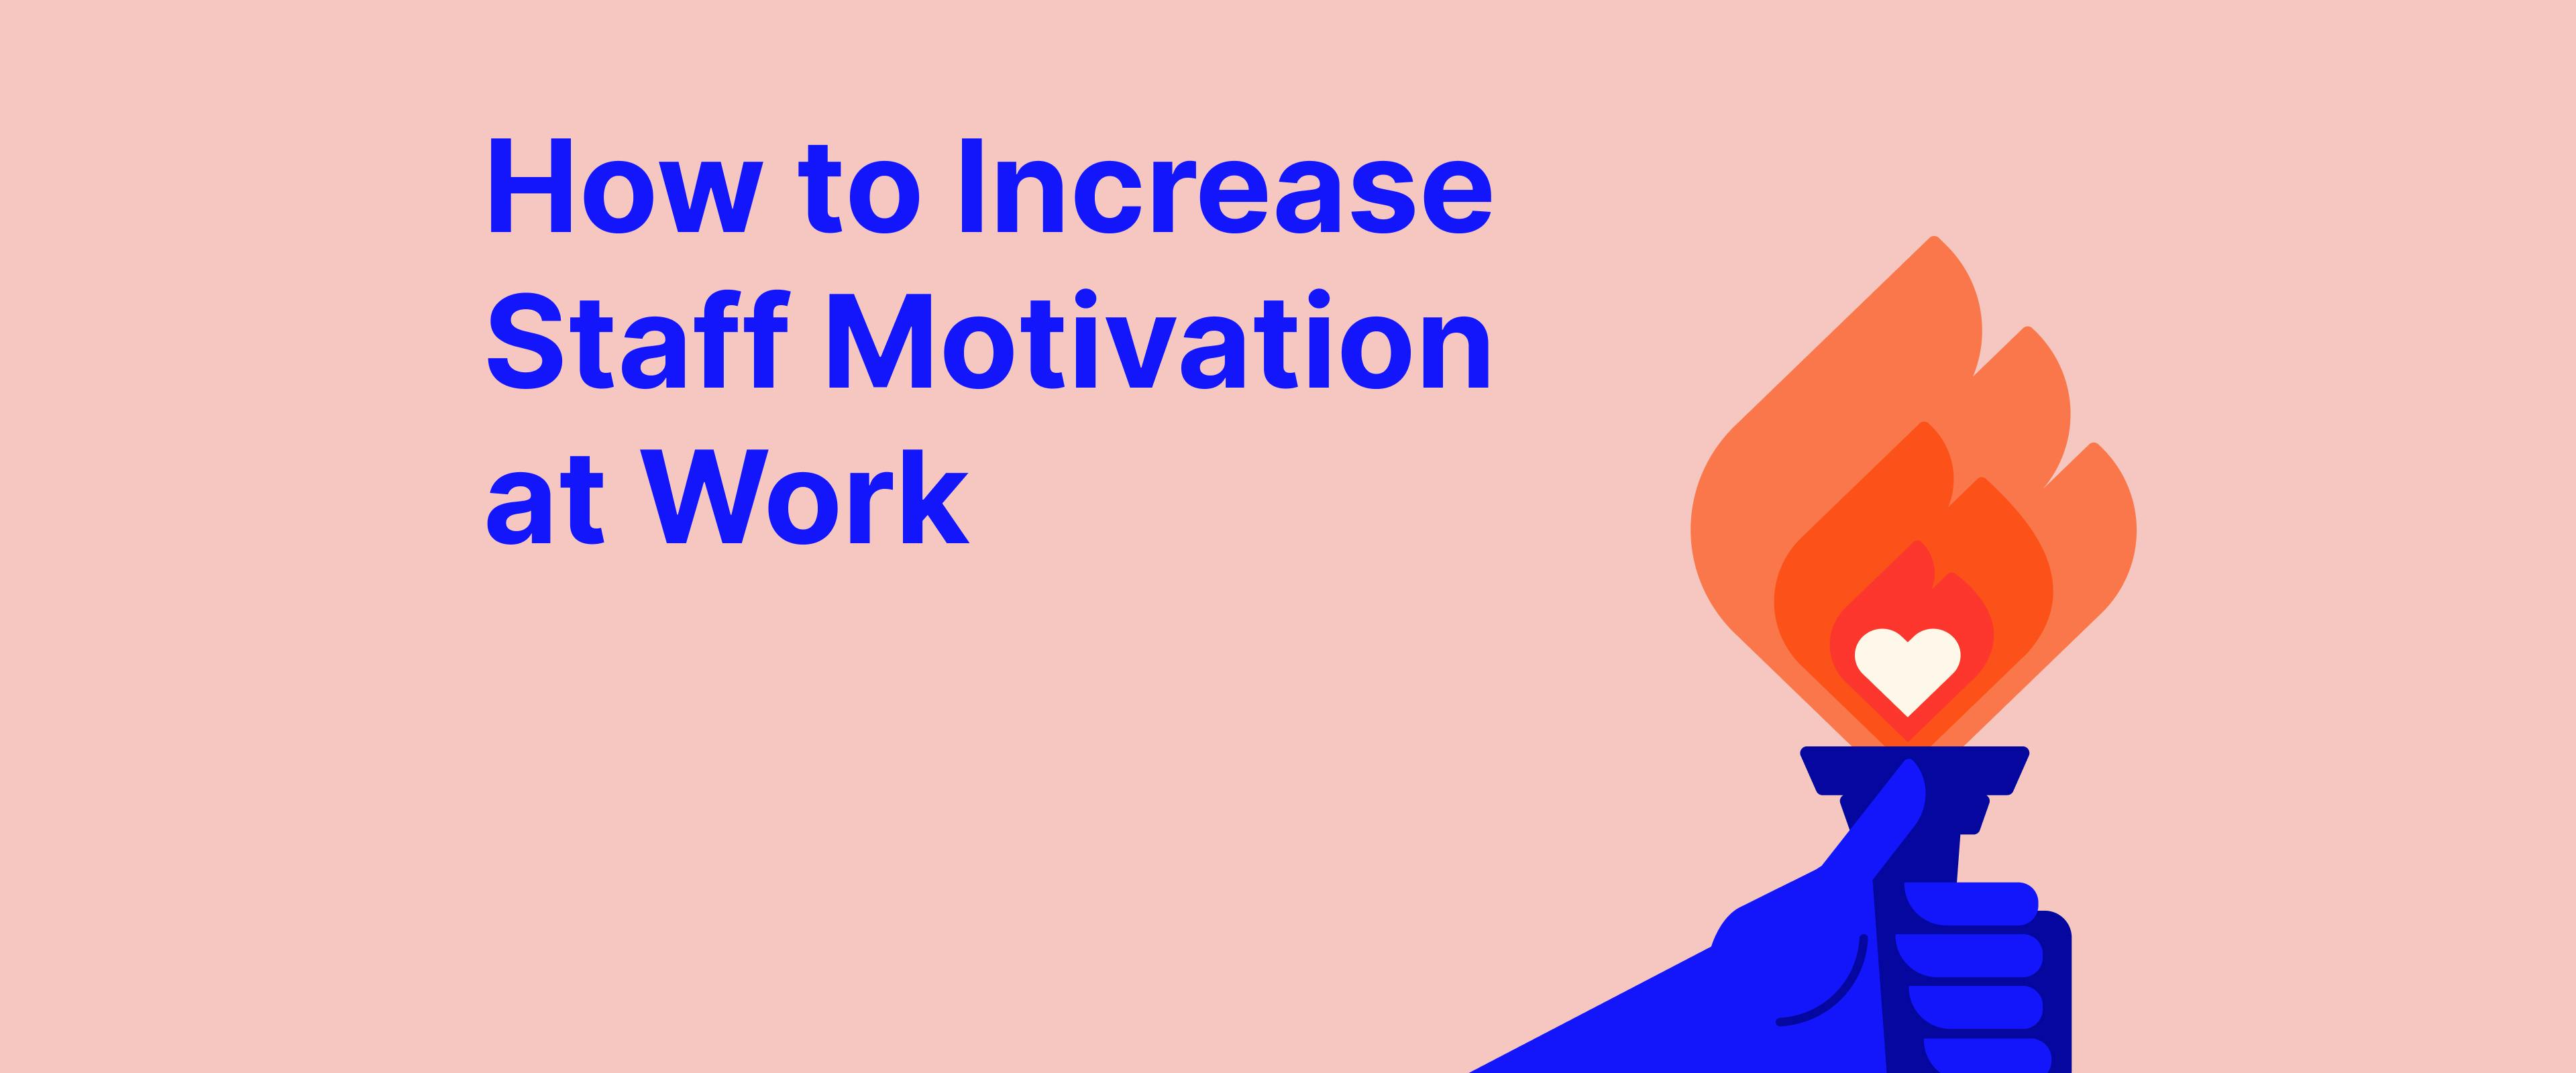 How to Increase Staff Motivation at Work - Headway App